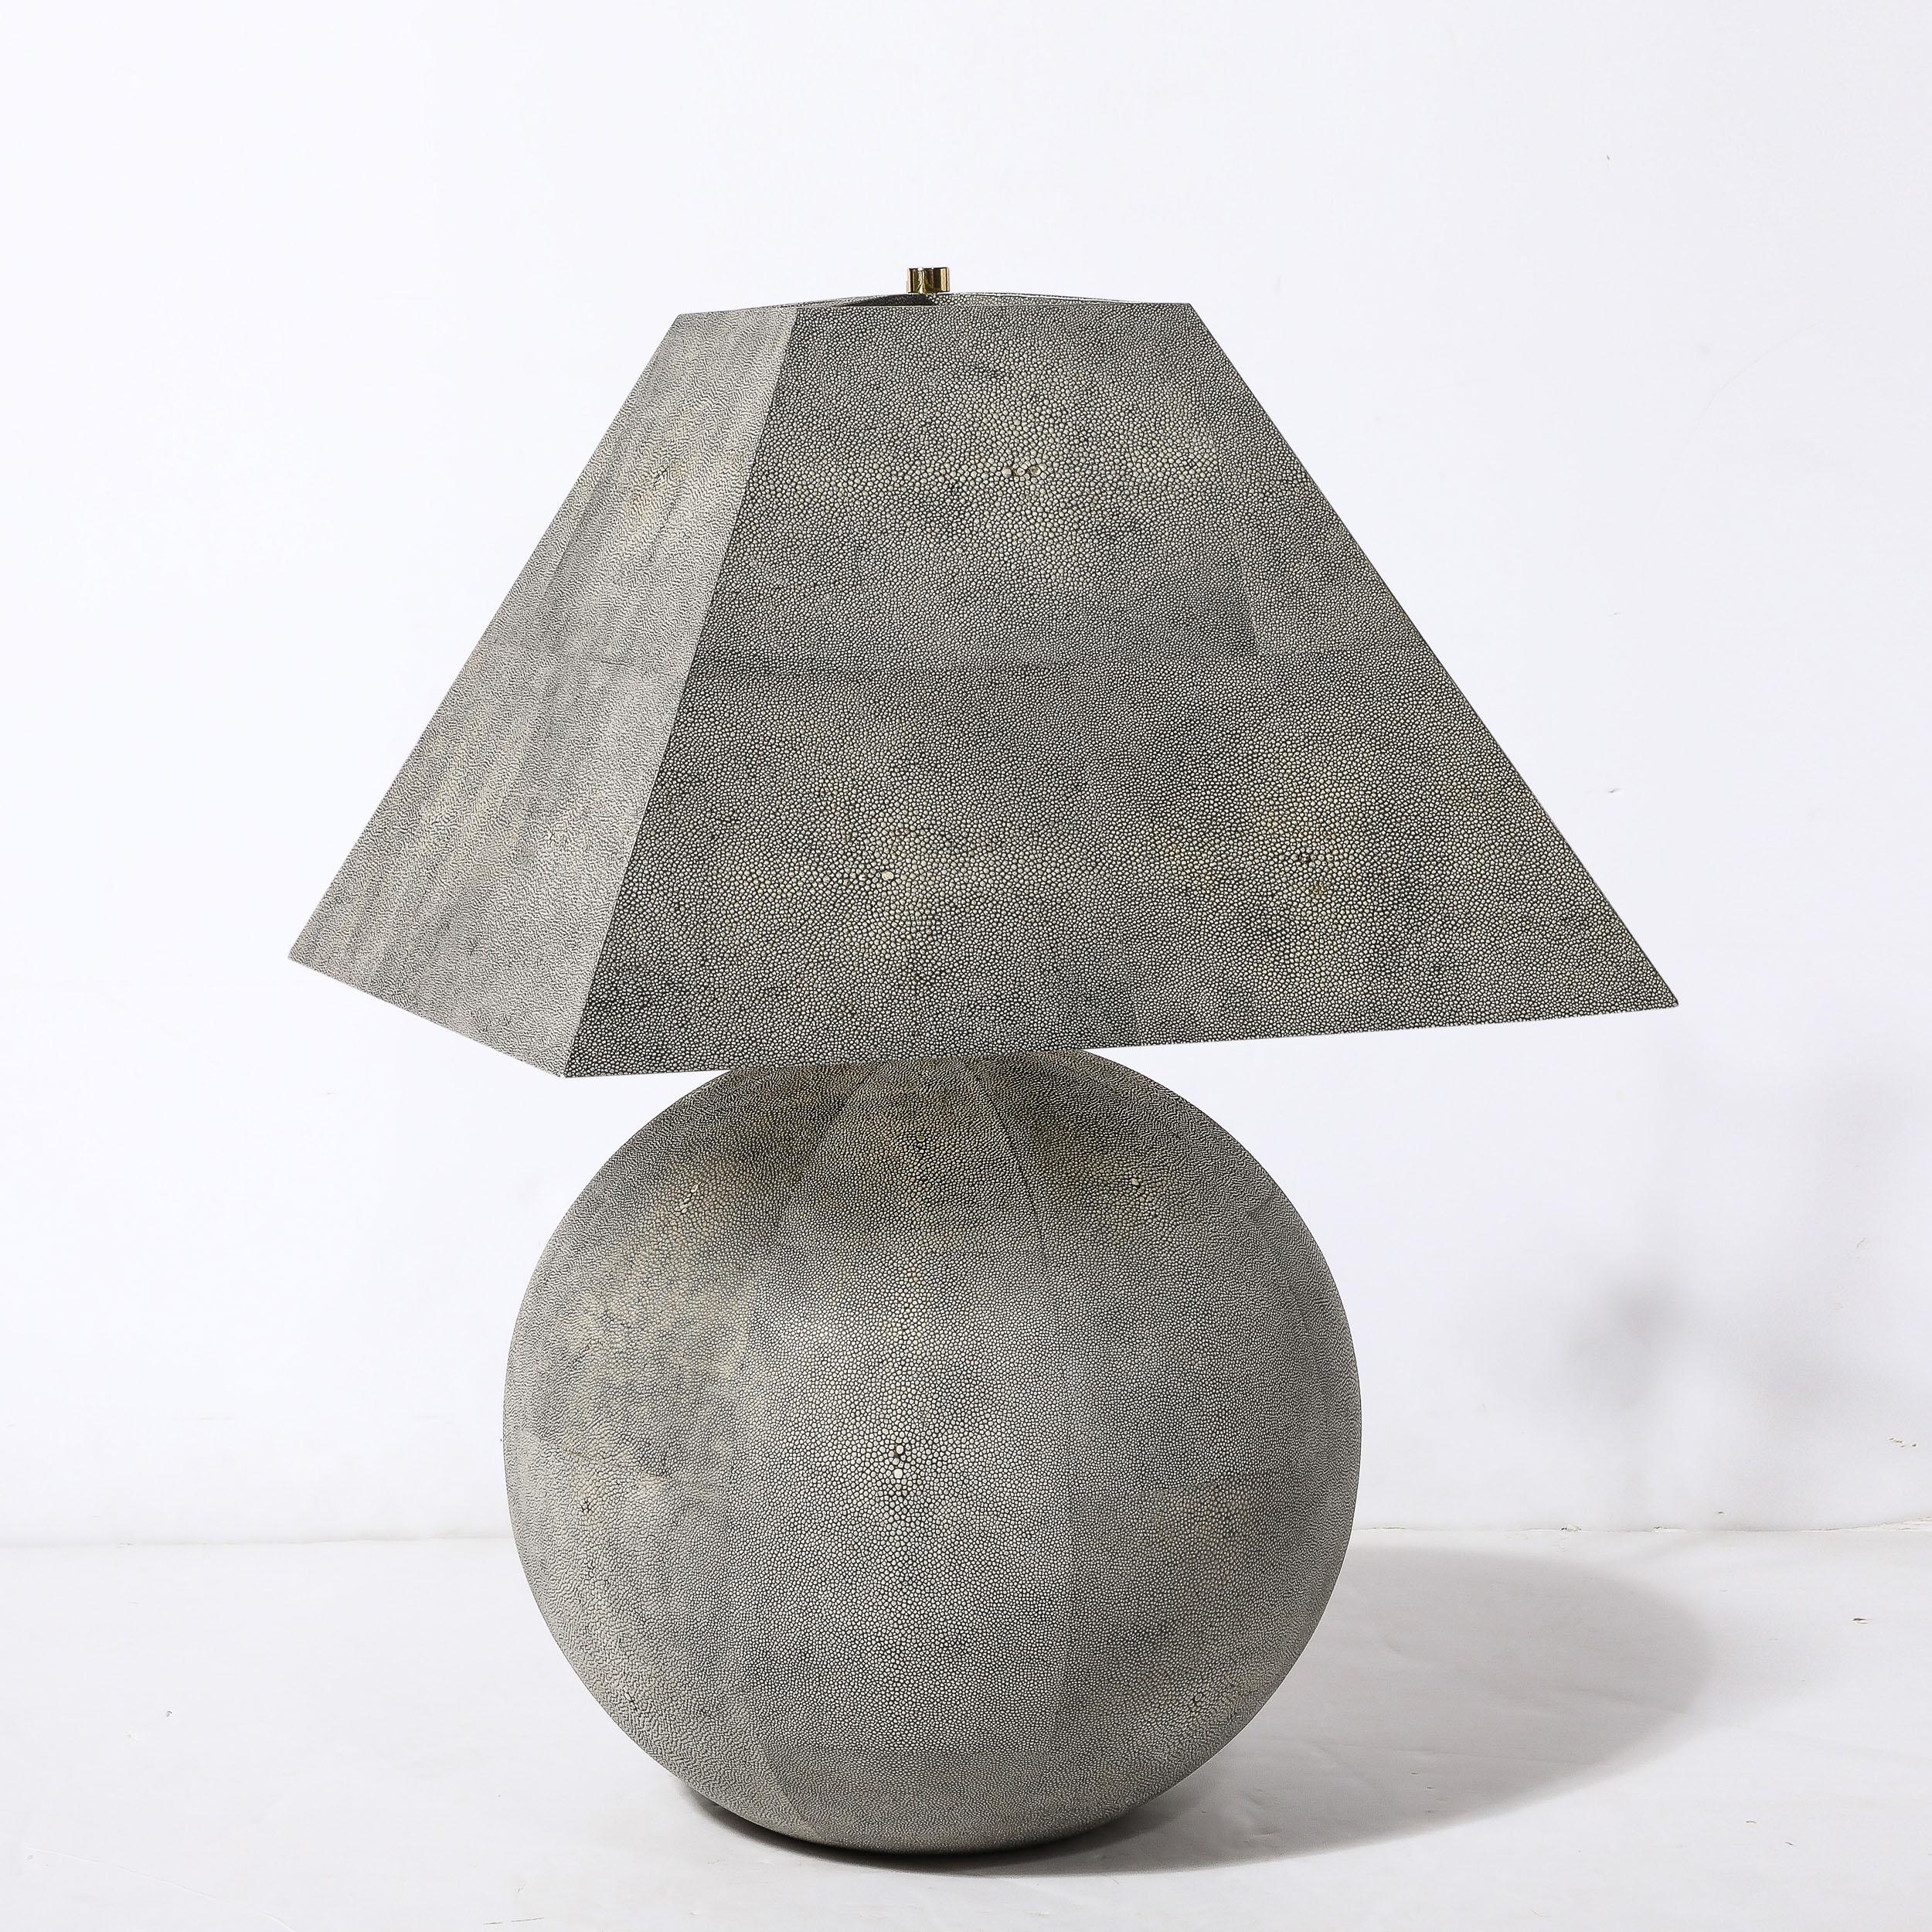 This remarkably scaled and materially stunning Mid-Century Modernist Large Geometric Table Lamp in Tessellated Shagreen is by the esteemed artist and designer Karl Springer and originates from the United States, Circa 1975. Karl Springer is highly